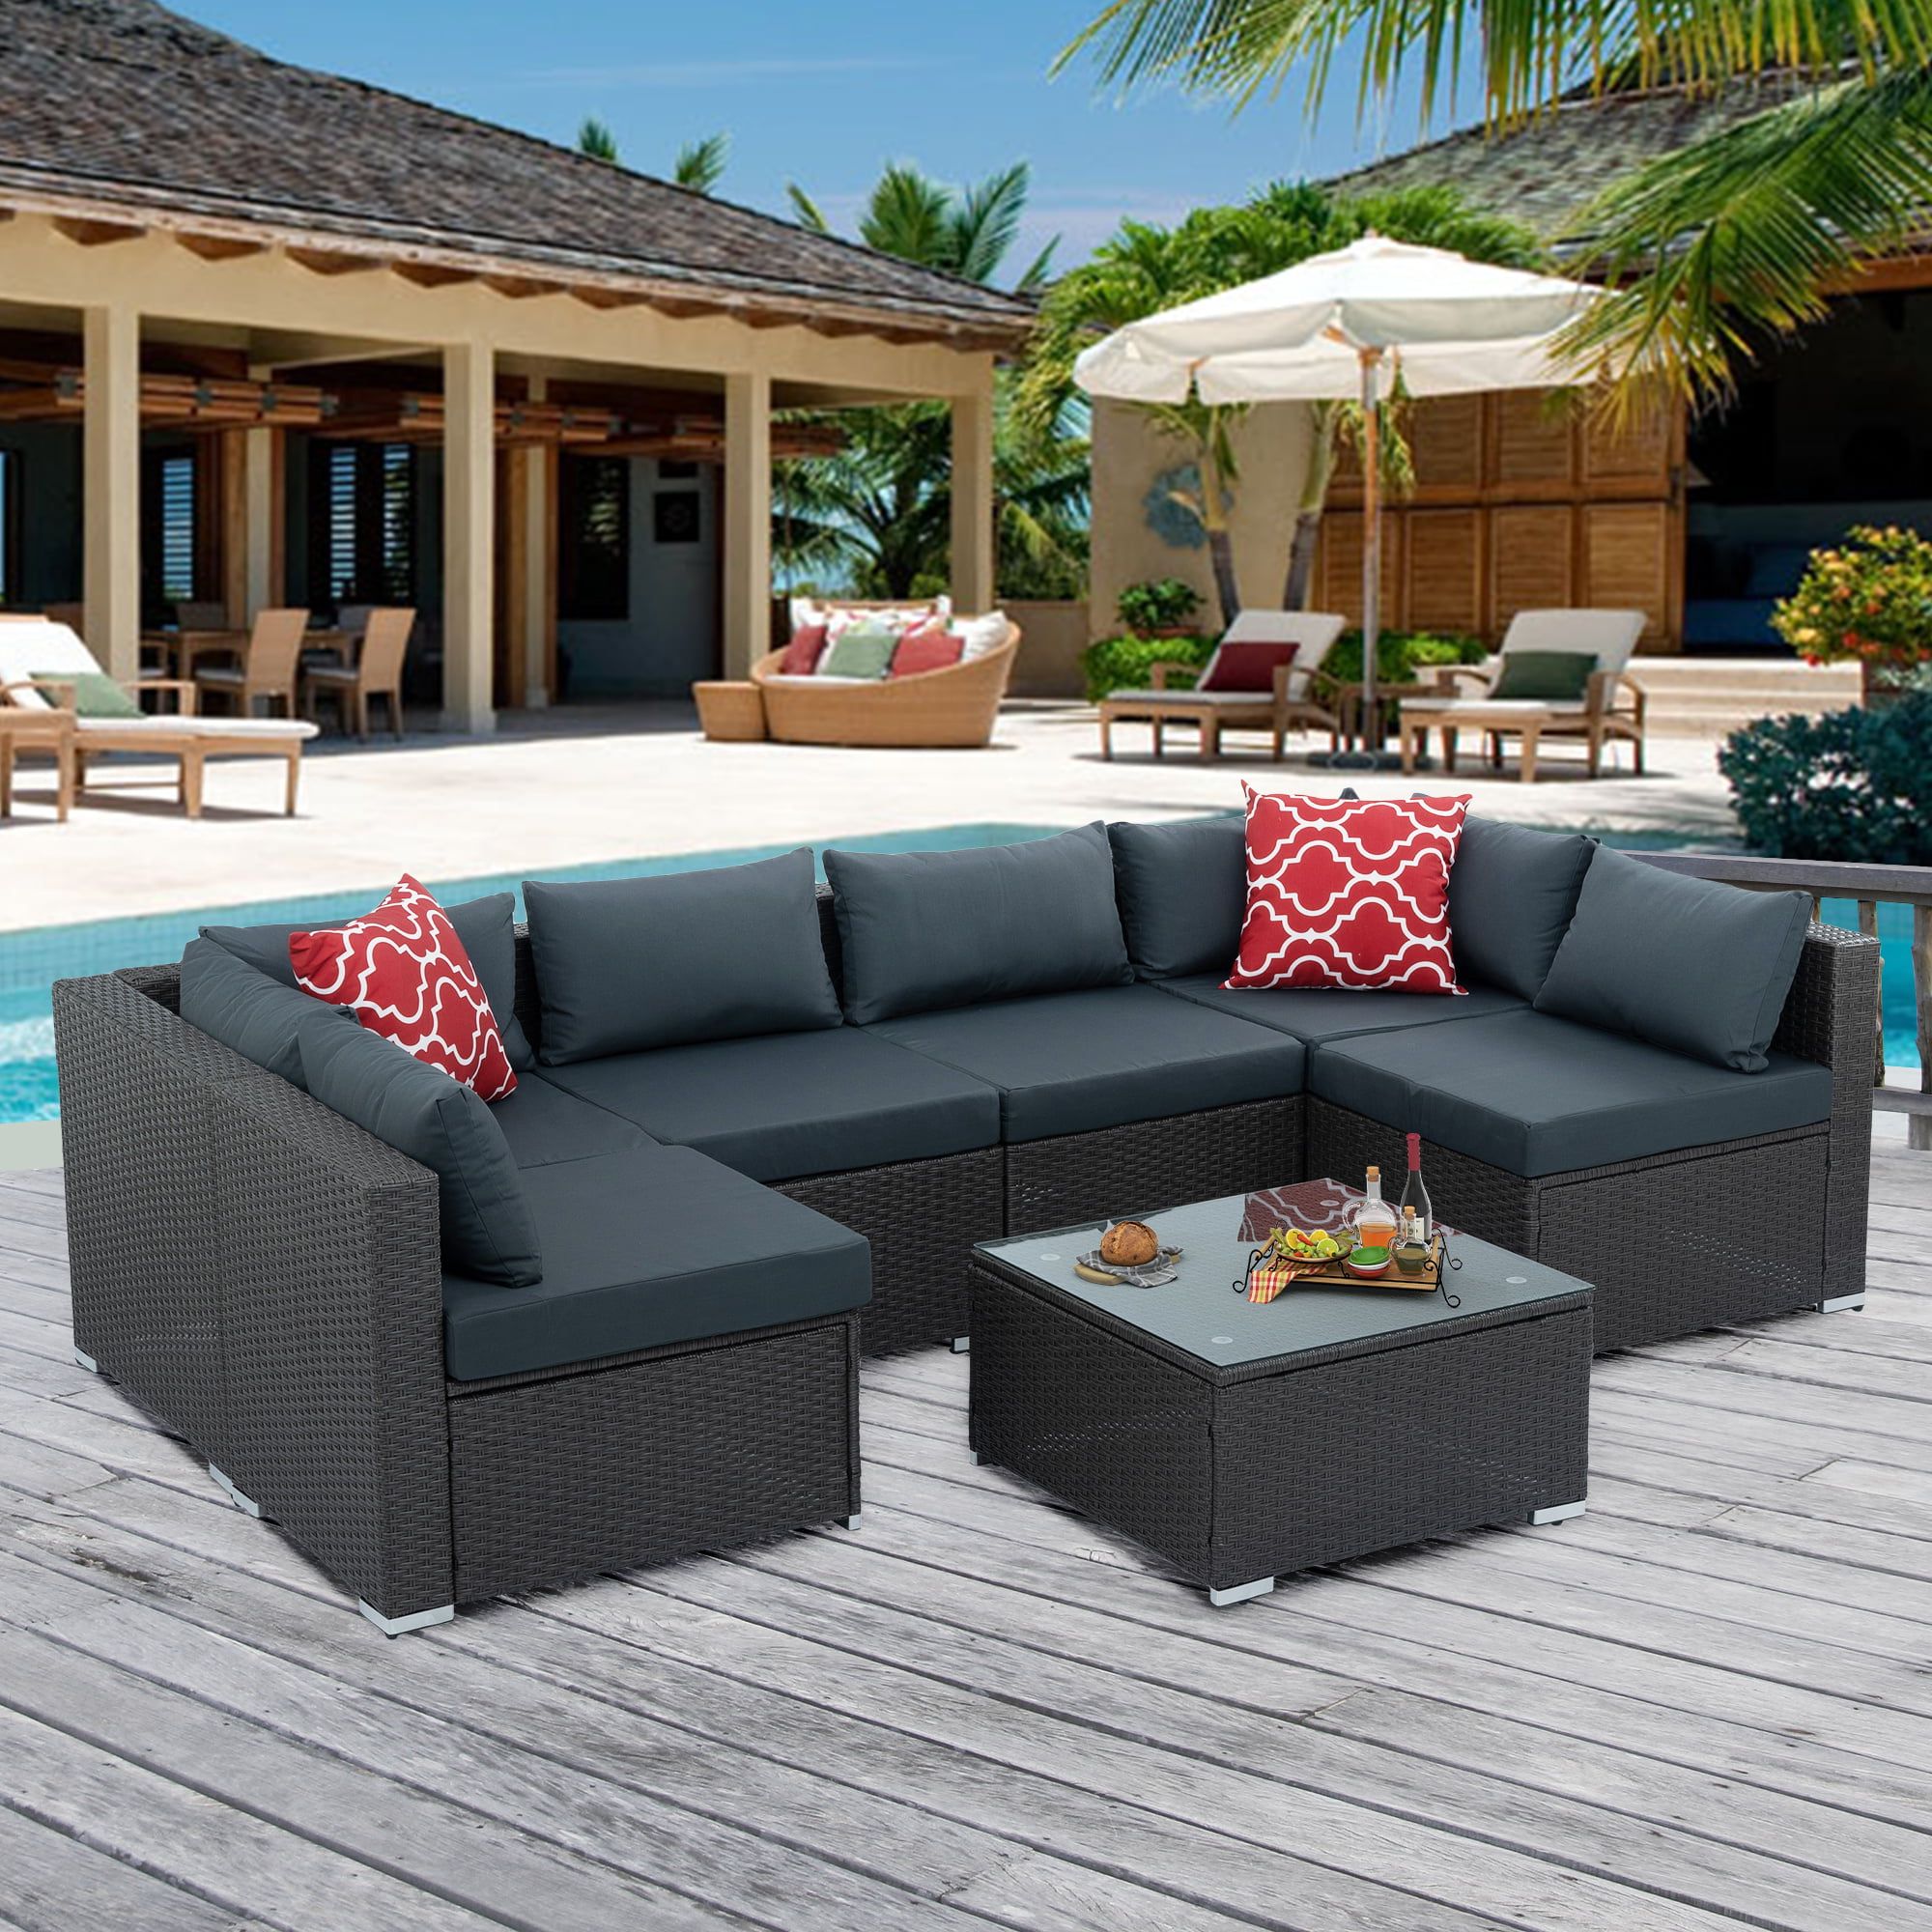 2018 Cushions & Coffee Table Furniture Couch Set Within 7 Piece Patio Sectional Sofa Set, Outdoor Conversation Set, All Weather  Wicker Sectional Seating Group With Cushions & Coffee Table, Modern Furniture  Couch Set For Patio Deck Garden Pool, Gray – Walmart (View 3 of 15)